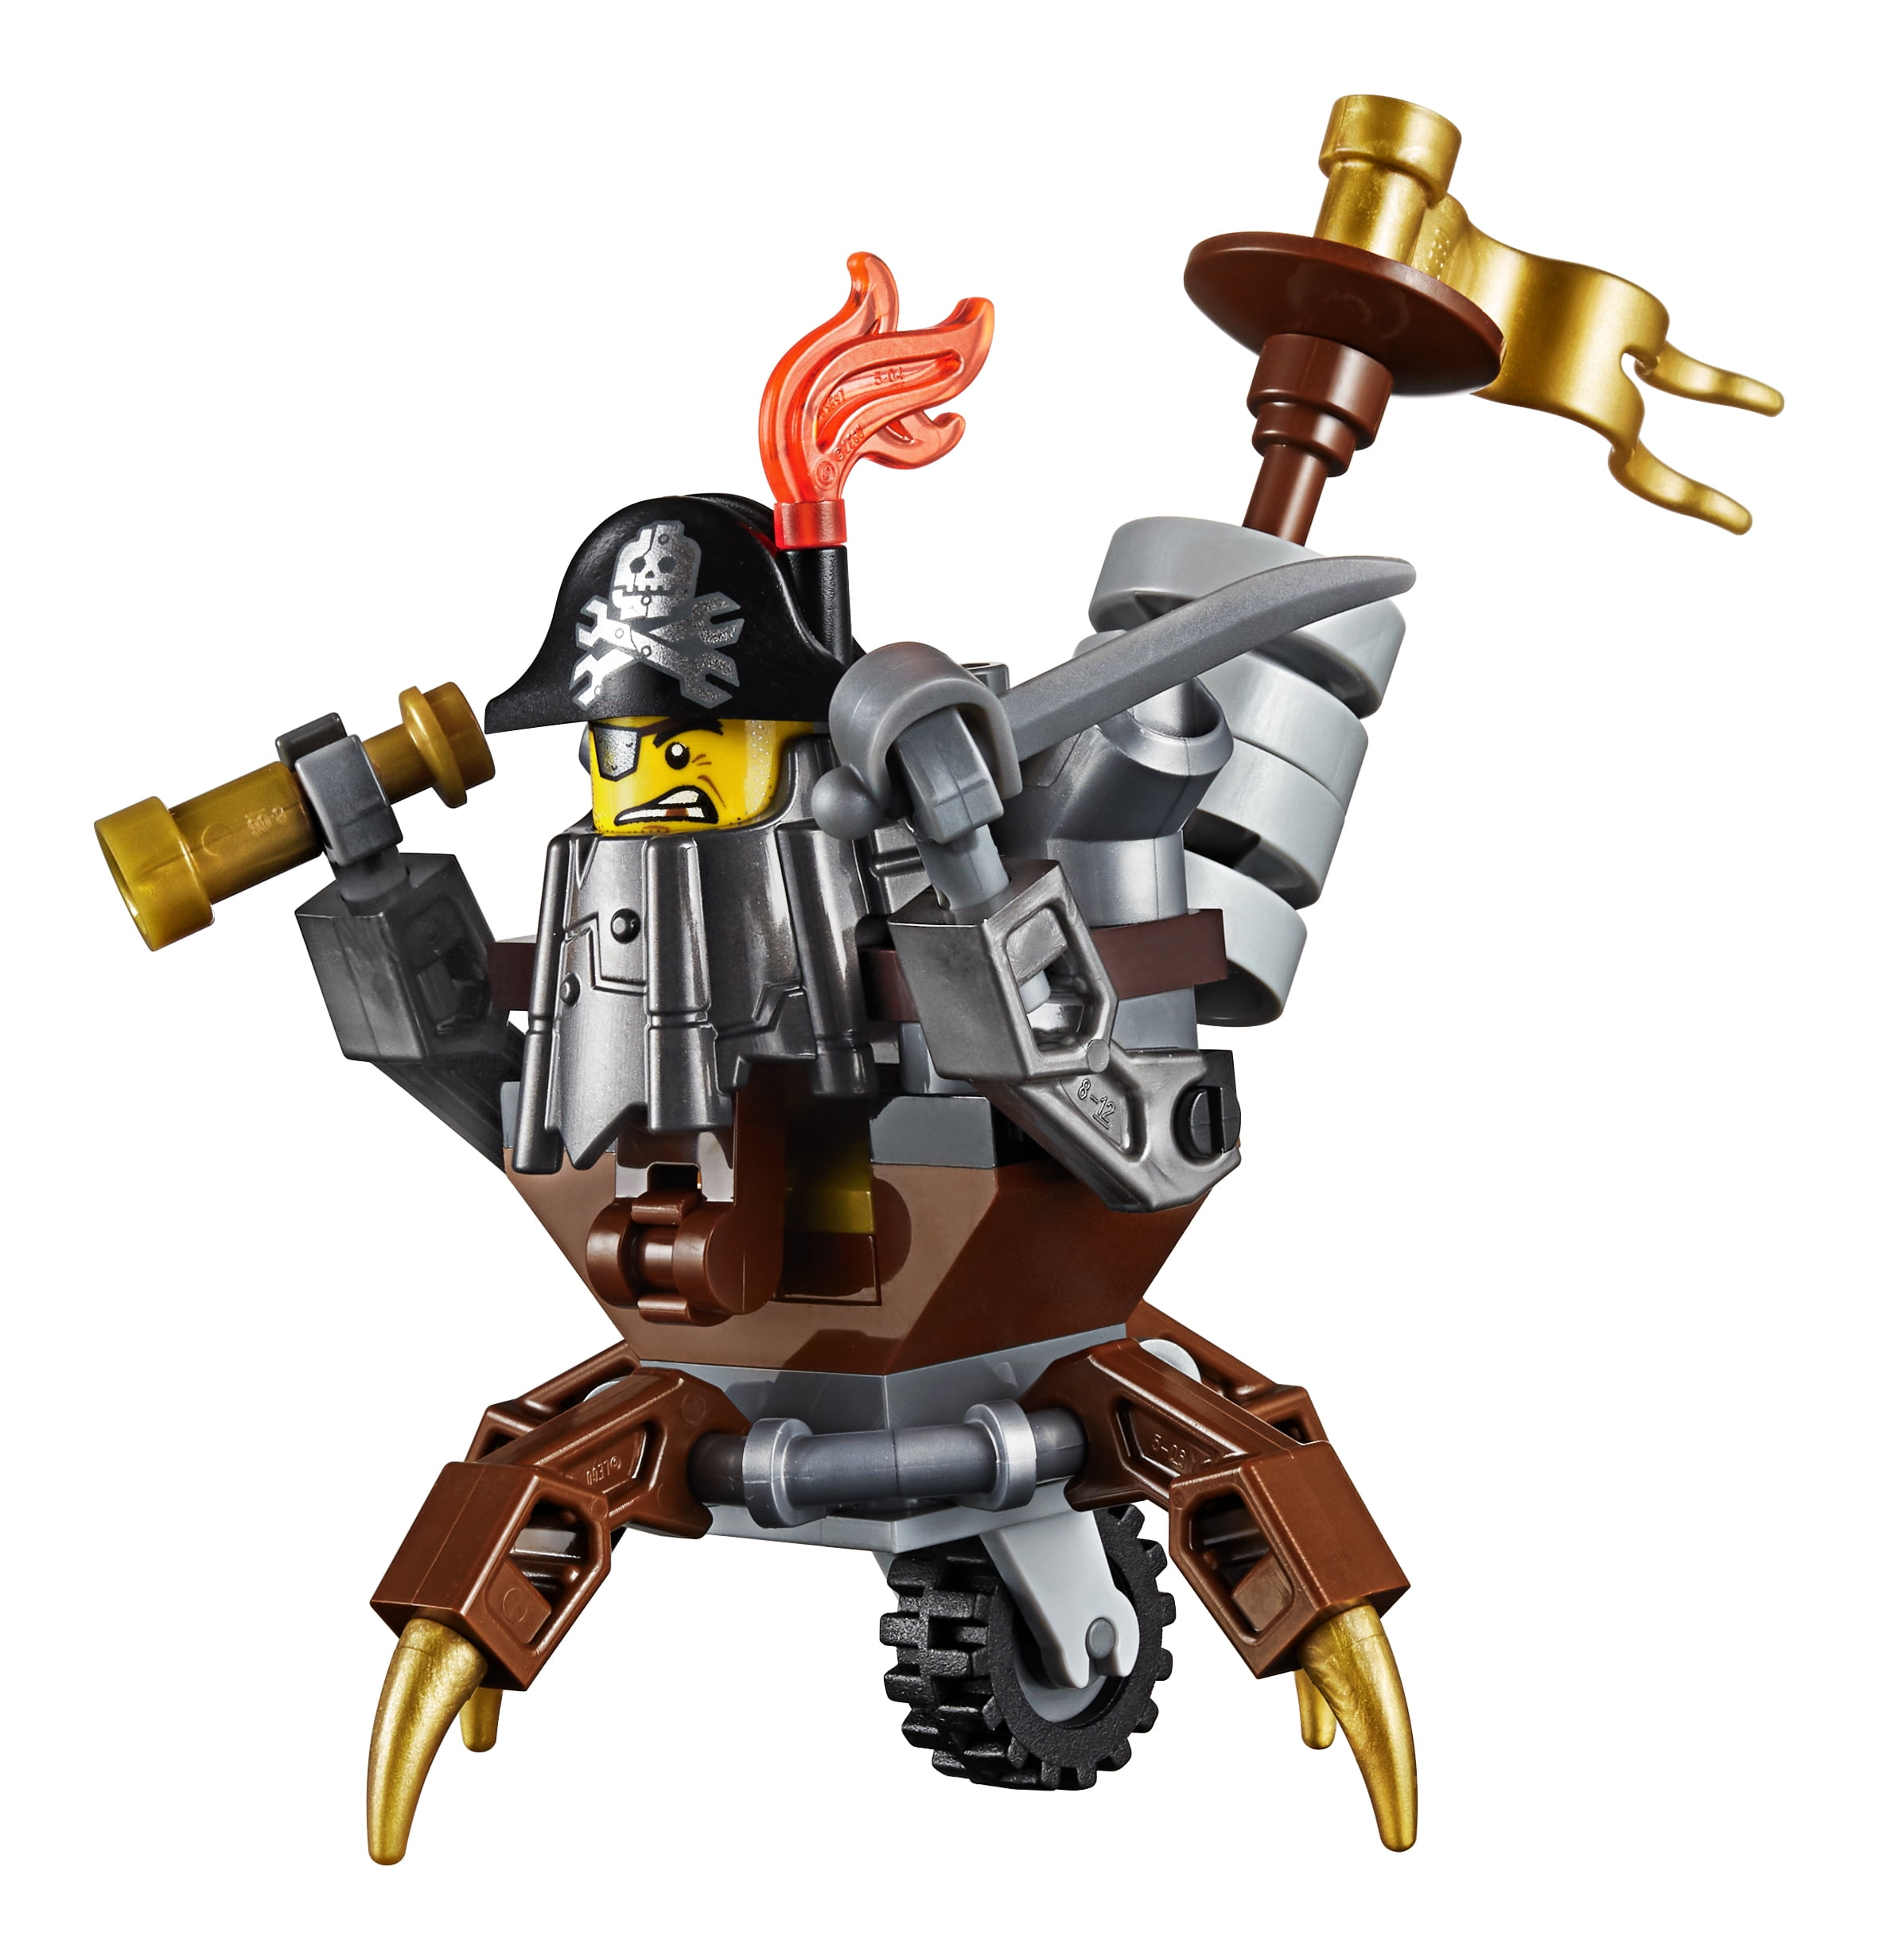 LEGO 30528 Mini Master-building MetalBeard Movie 2 3in1 Polybag for sale online